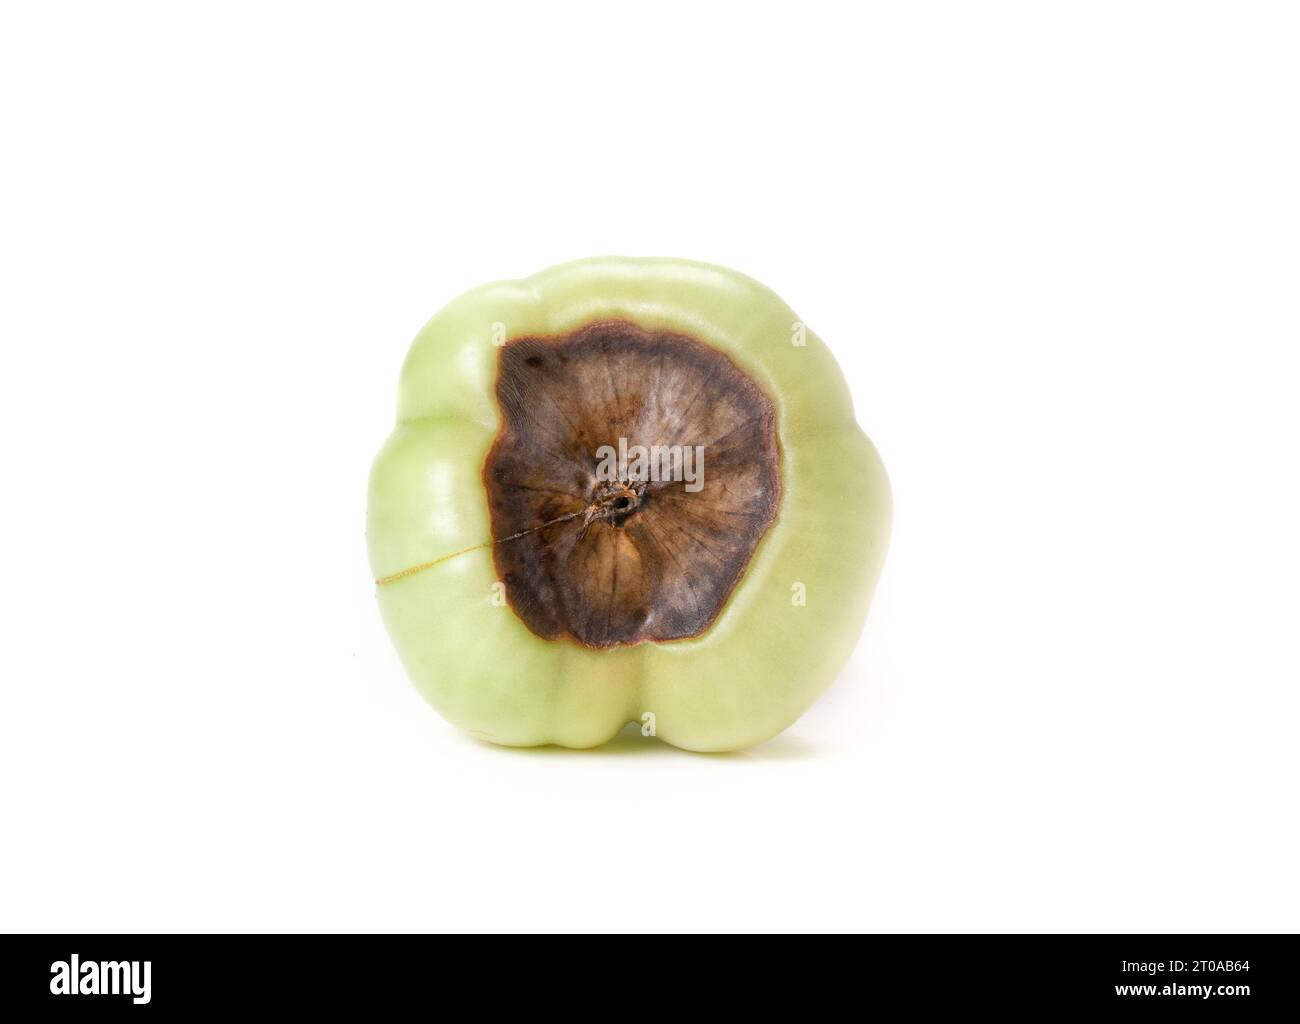 Roadster tomato with blossom end rot. Bottom view or unripe green tomato fruit with dark brown large spot or decay from a calcium deficiency. Non-fung Stock Photo